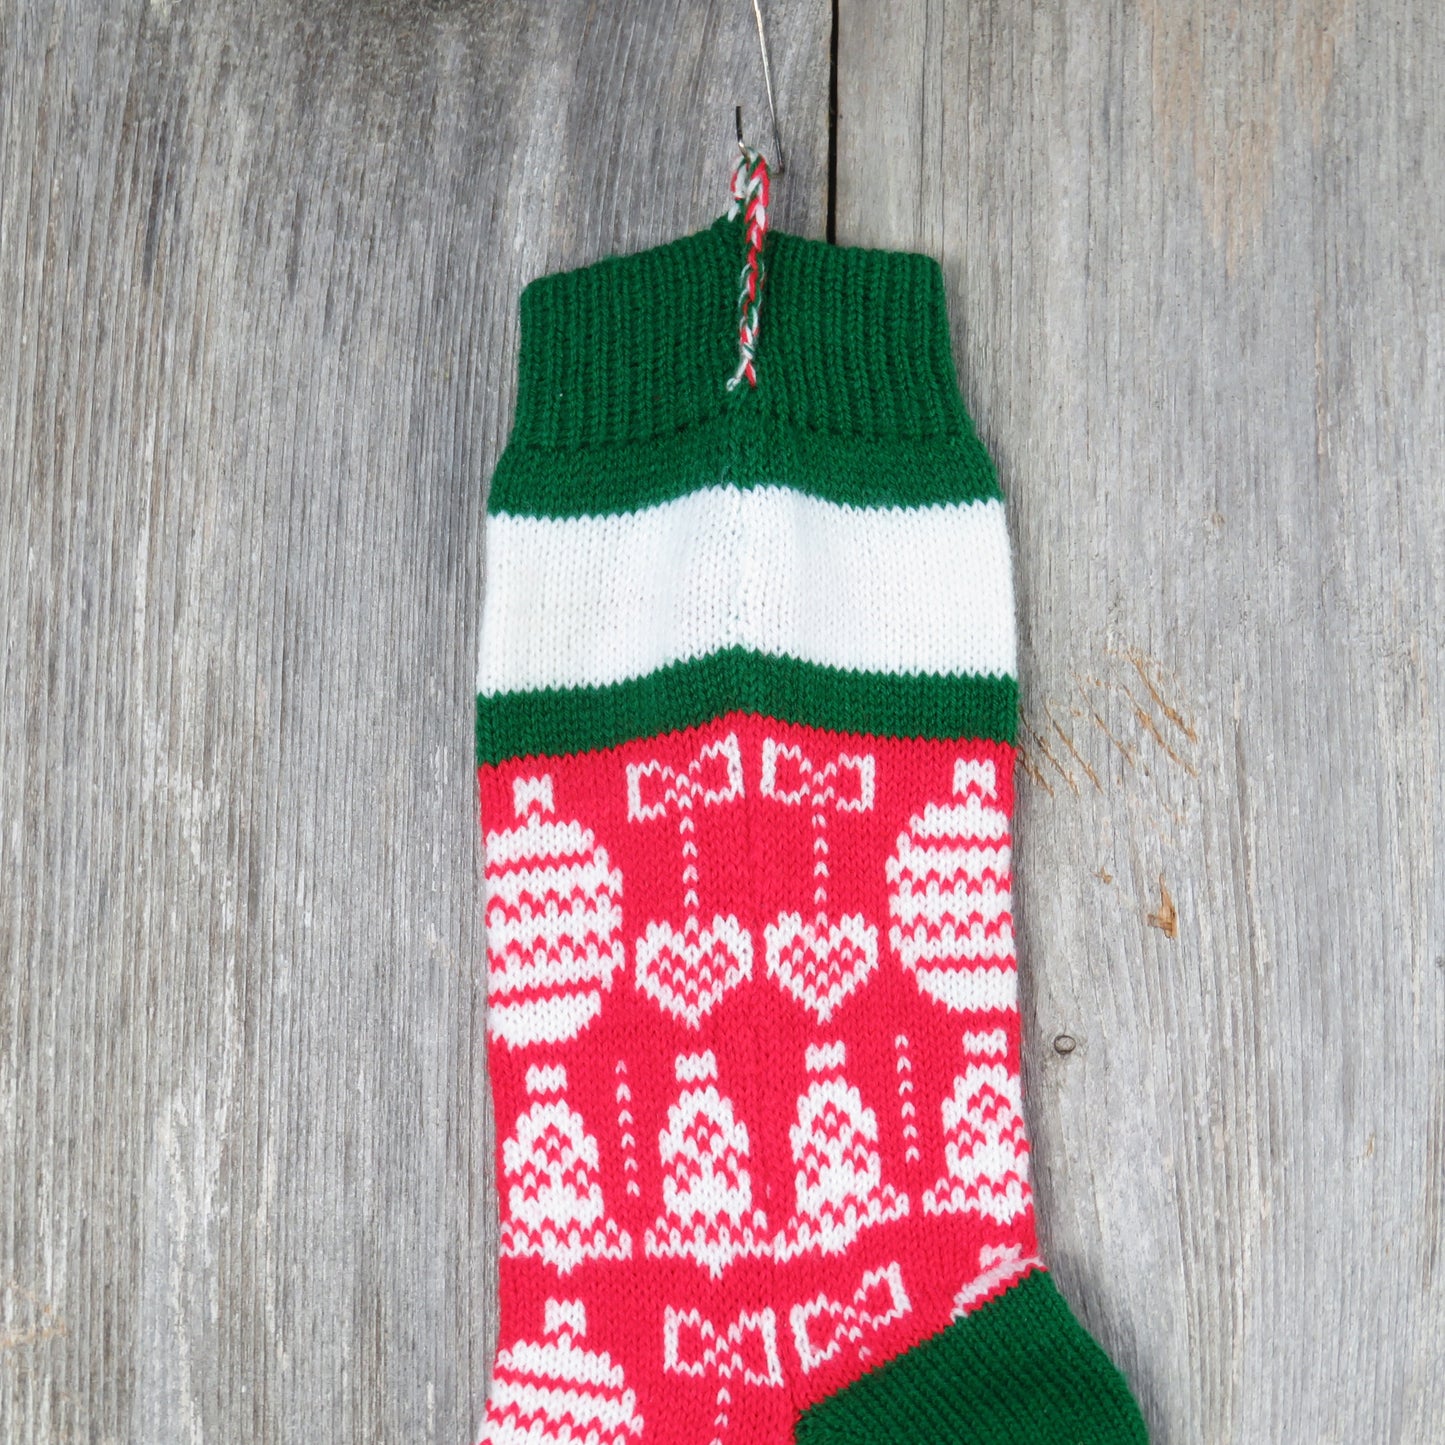 Vintage Knit Stocking Cindy Name Red White Green Knitted Christmas Ornament Pattern Sock